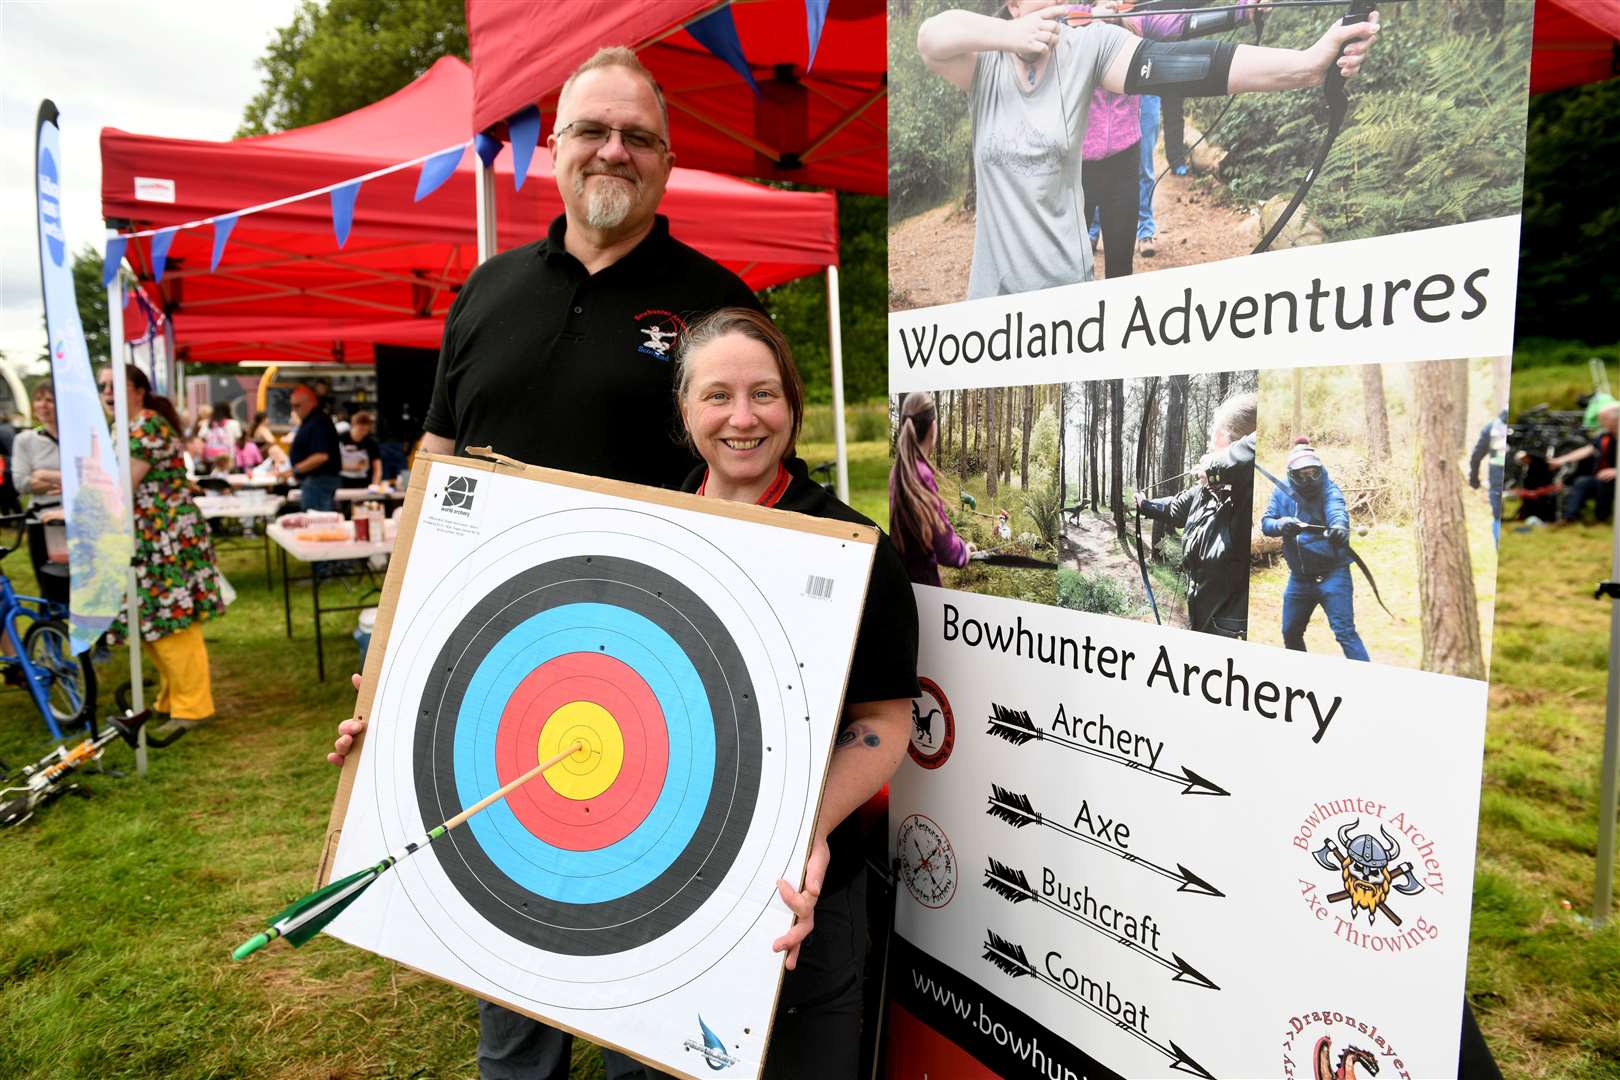 Simon and Claire Driver, Woodland Adventures Bowhunter Archery instructors. Picture: James Mackenzie.